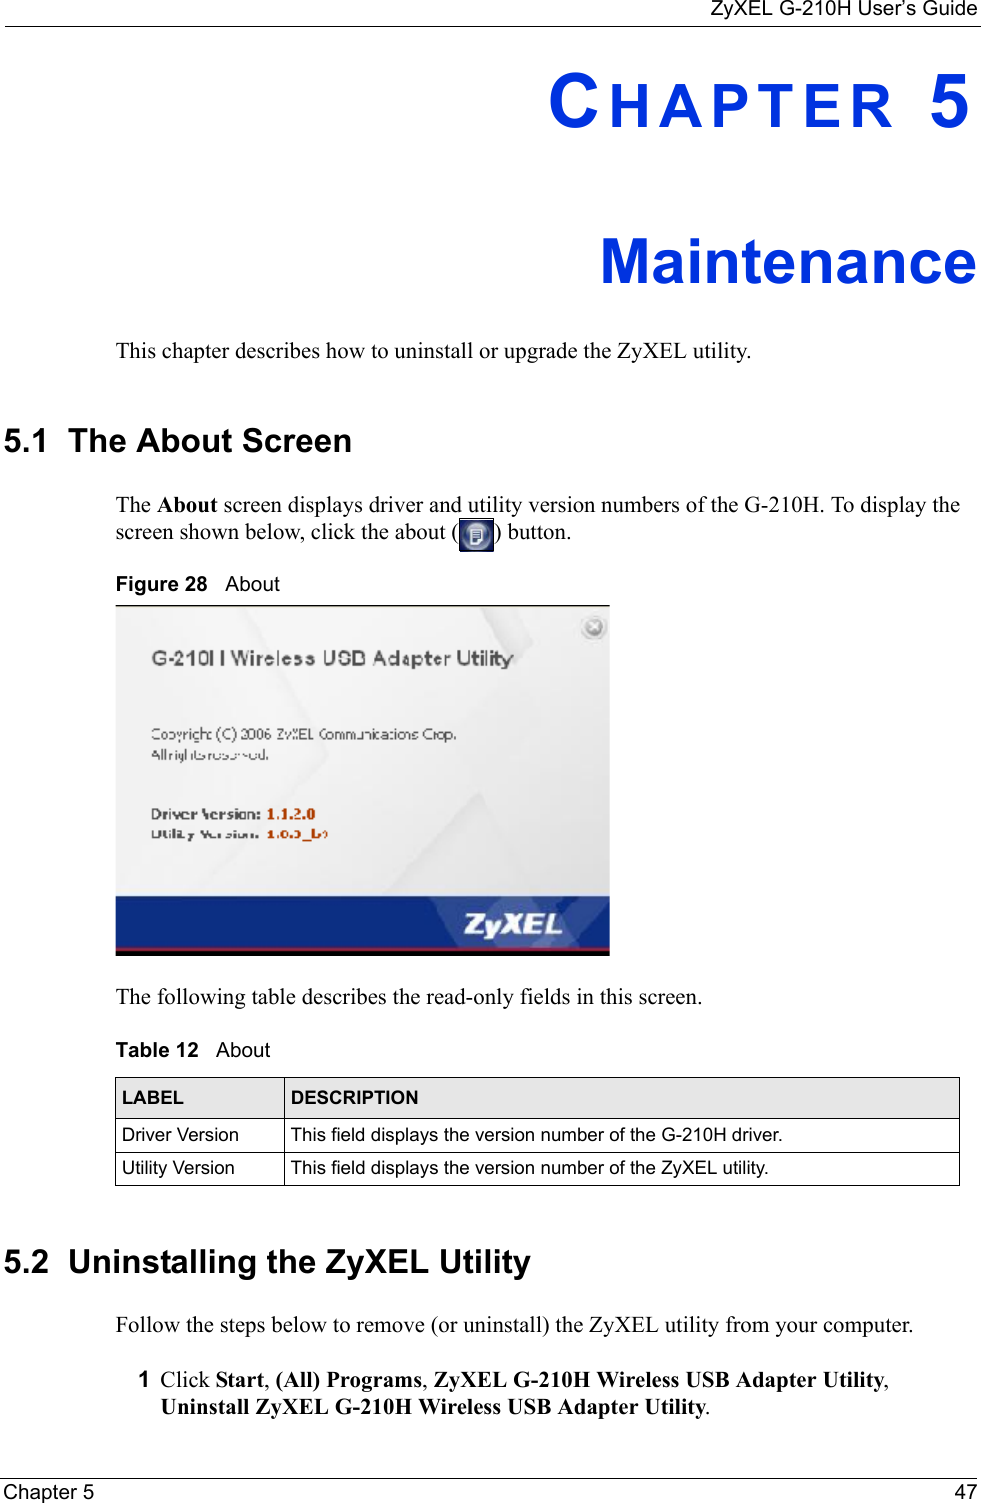 ZyXEL G-210H User’s GuideChapter 5 47CHAPTER 5MaintenanceThis chapter describes how to uninstall or upgrade the ZyXEL utility.5.1  The About Screen The About screen displays driver and utility version numbers of the G-210H. To display the screen shown below, click the about ( ) button.Figure 28   About The following table describes the read-only fields in this screen. 5.2  Uninstalling the ZyXEL Utility Follow the steps below to remove (or uninstall) the ZyXEL utility from your computer.1Click Start, (All) Programs, ZyXEL G-210H Wireless USB Adapter Utility, Uninstall ZyXEL G-210H Wireless USB Adapter Utility.Table 12   About LABEL DESCRIPTIONDriver Version This field displays the version number of the G-210H driver.Utility Version This field displays the version number of the ZyXEL utility.